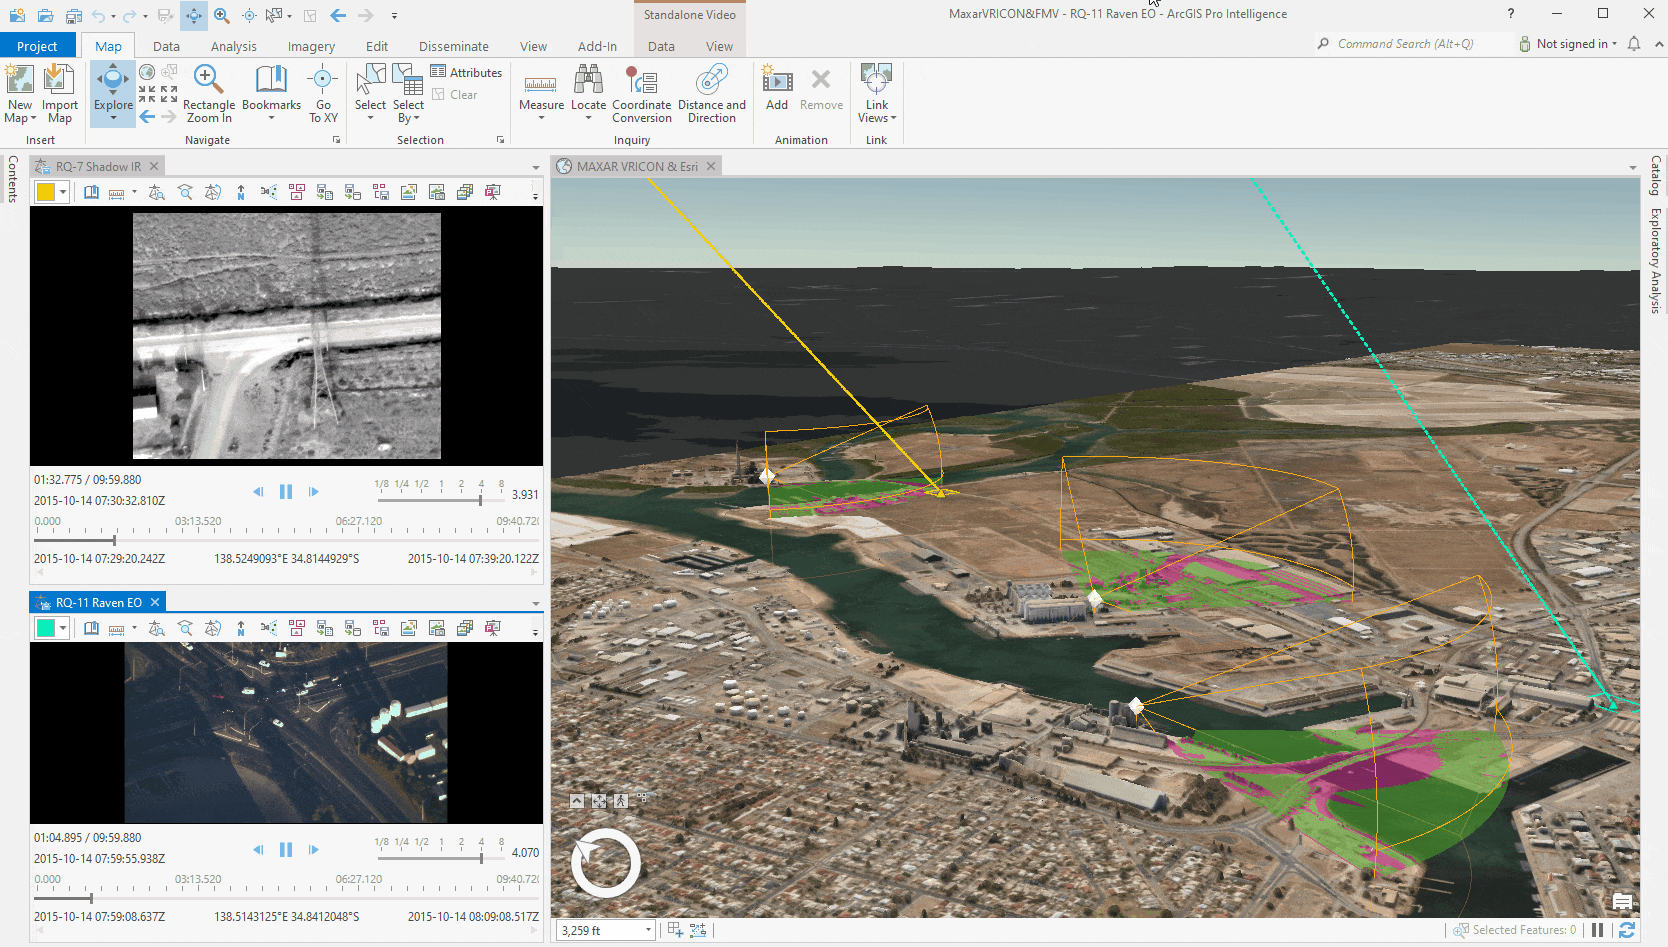 Demonstrating MAXAR's 3D data & Motion Imagery in ArcGIS Pro Intelligence